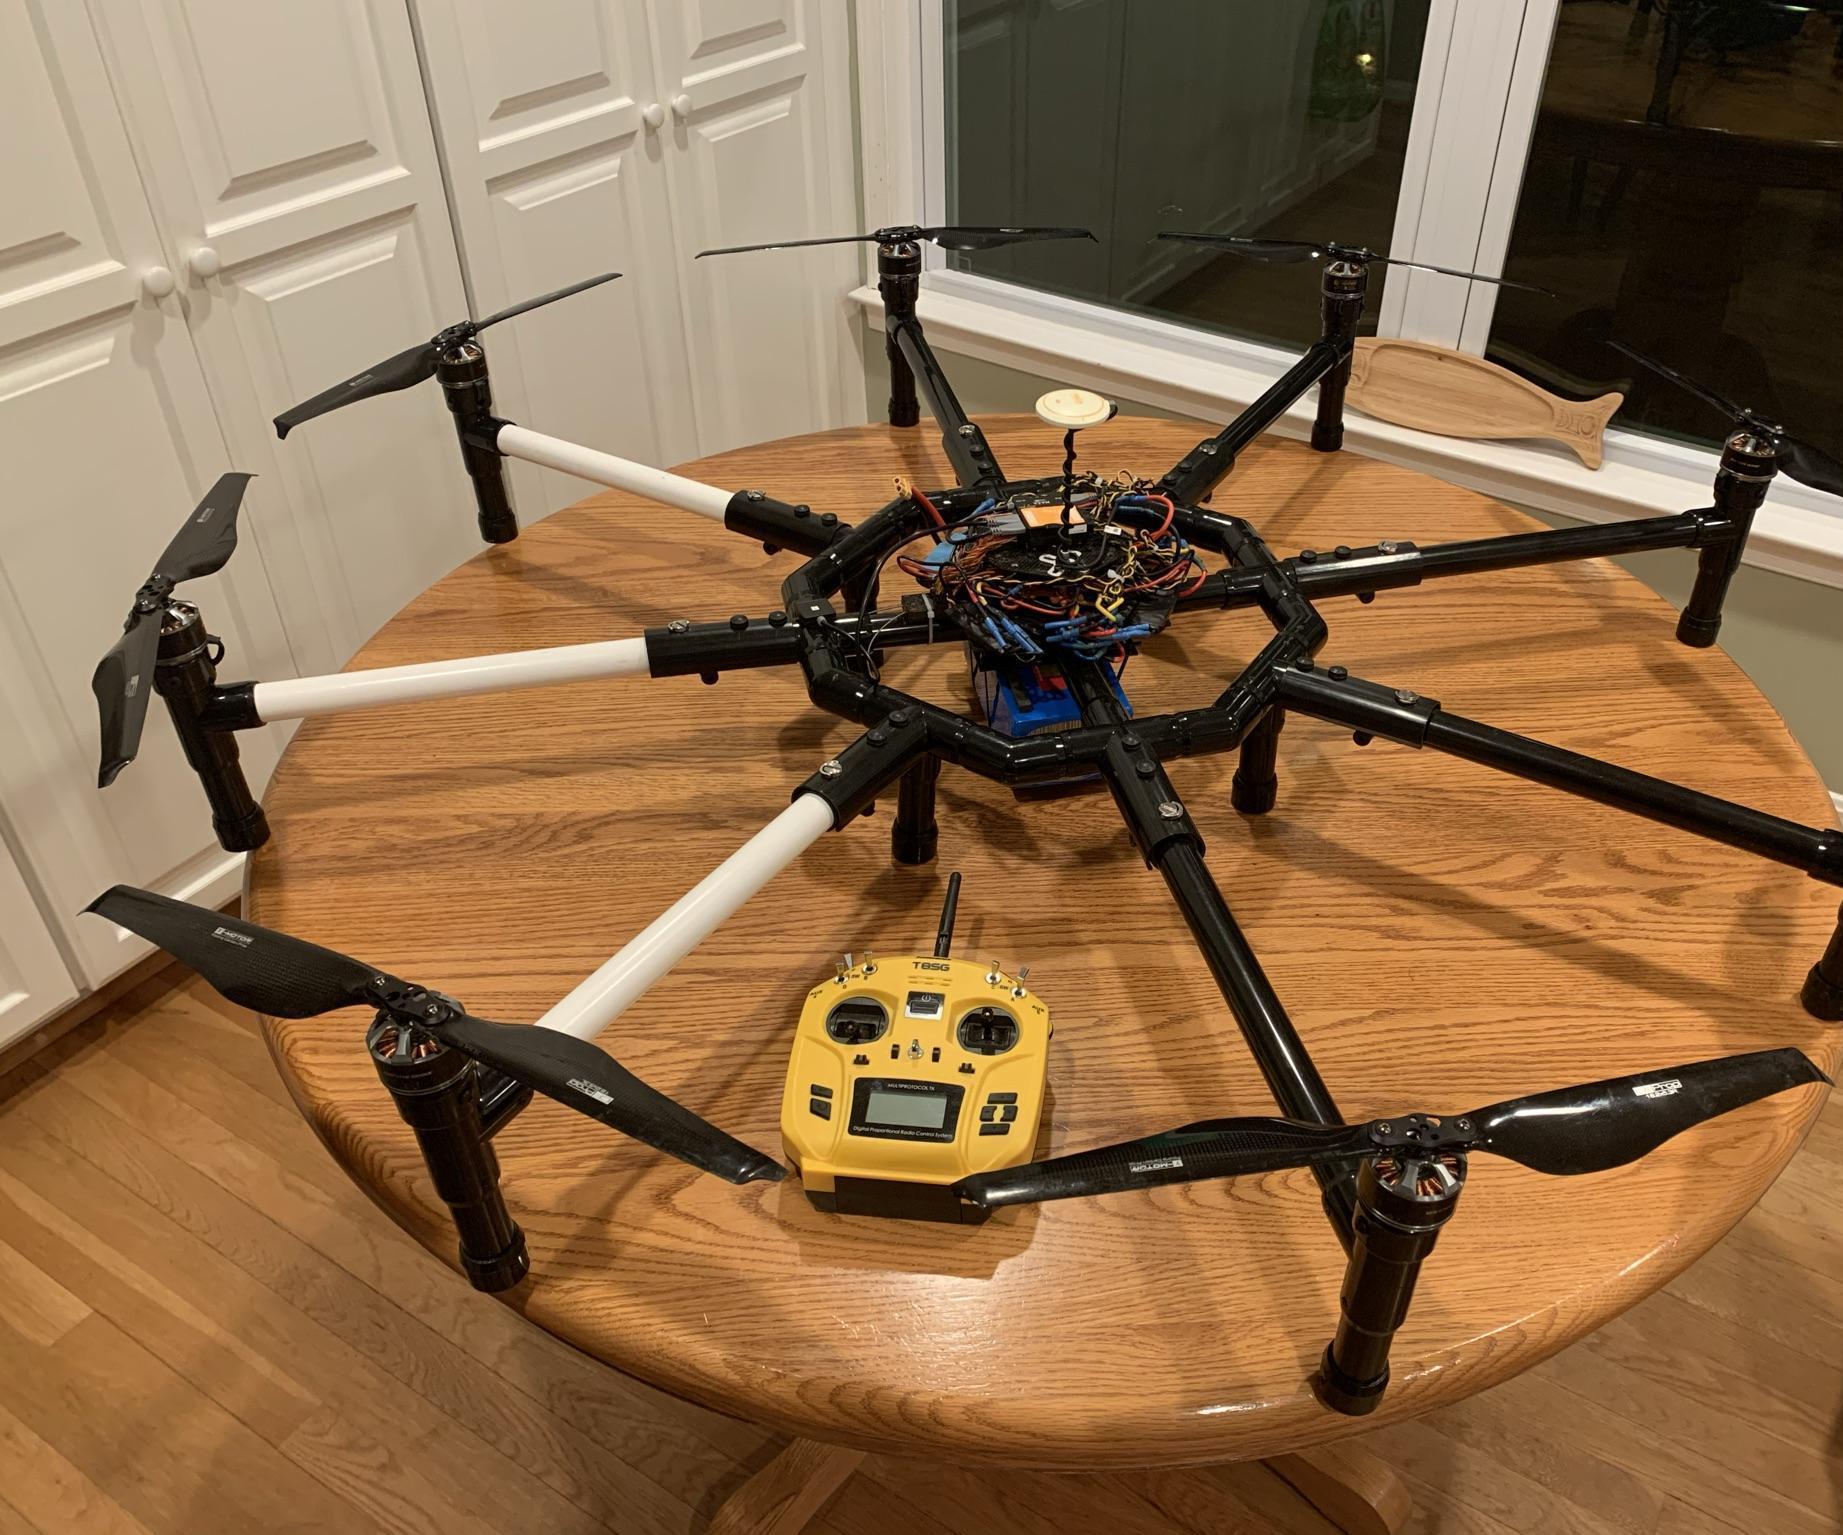 PVC Octocopter Drone Frame With Folding Arms